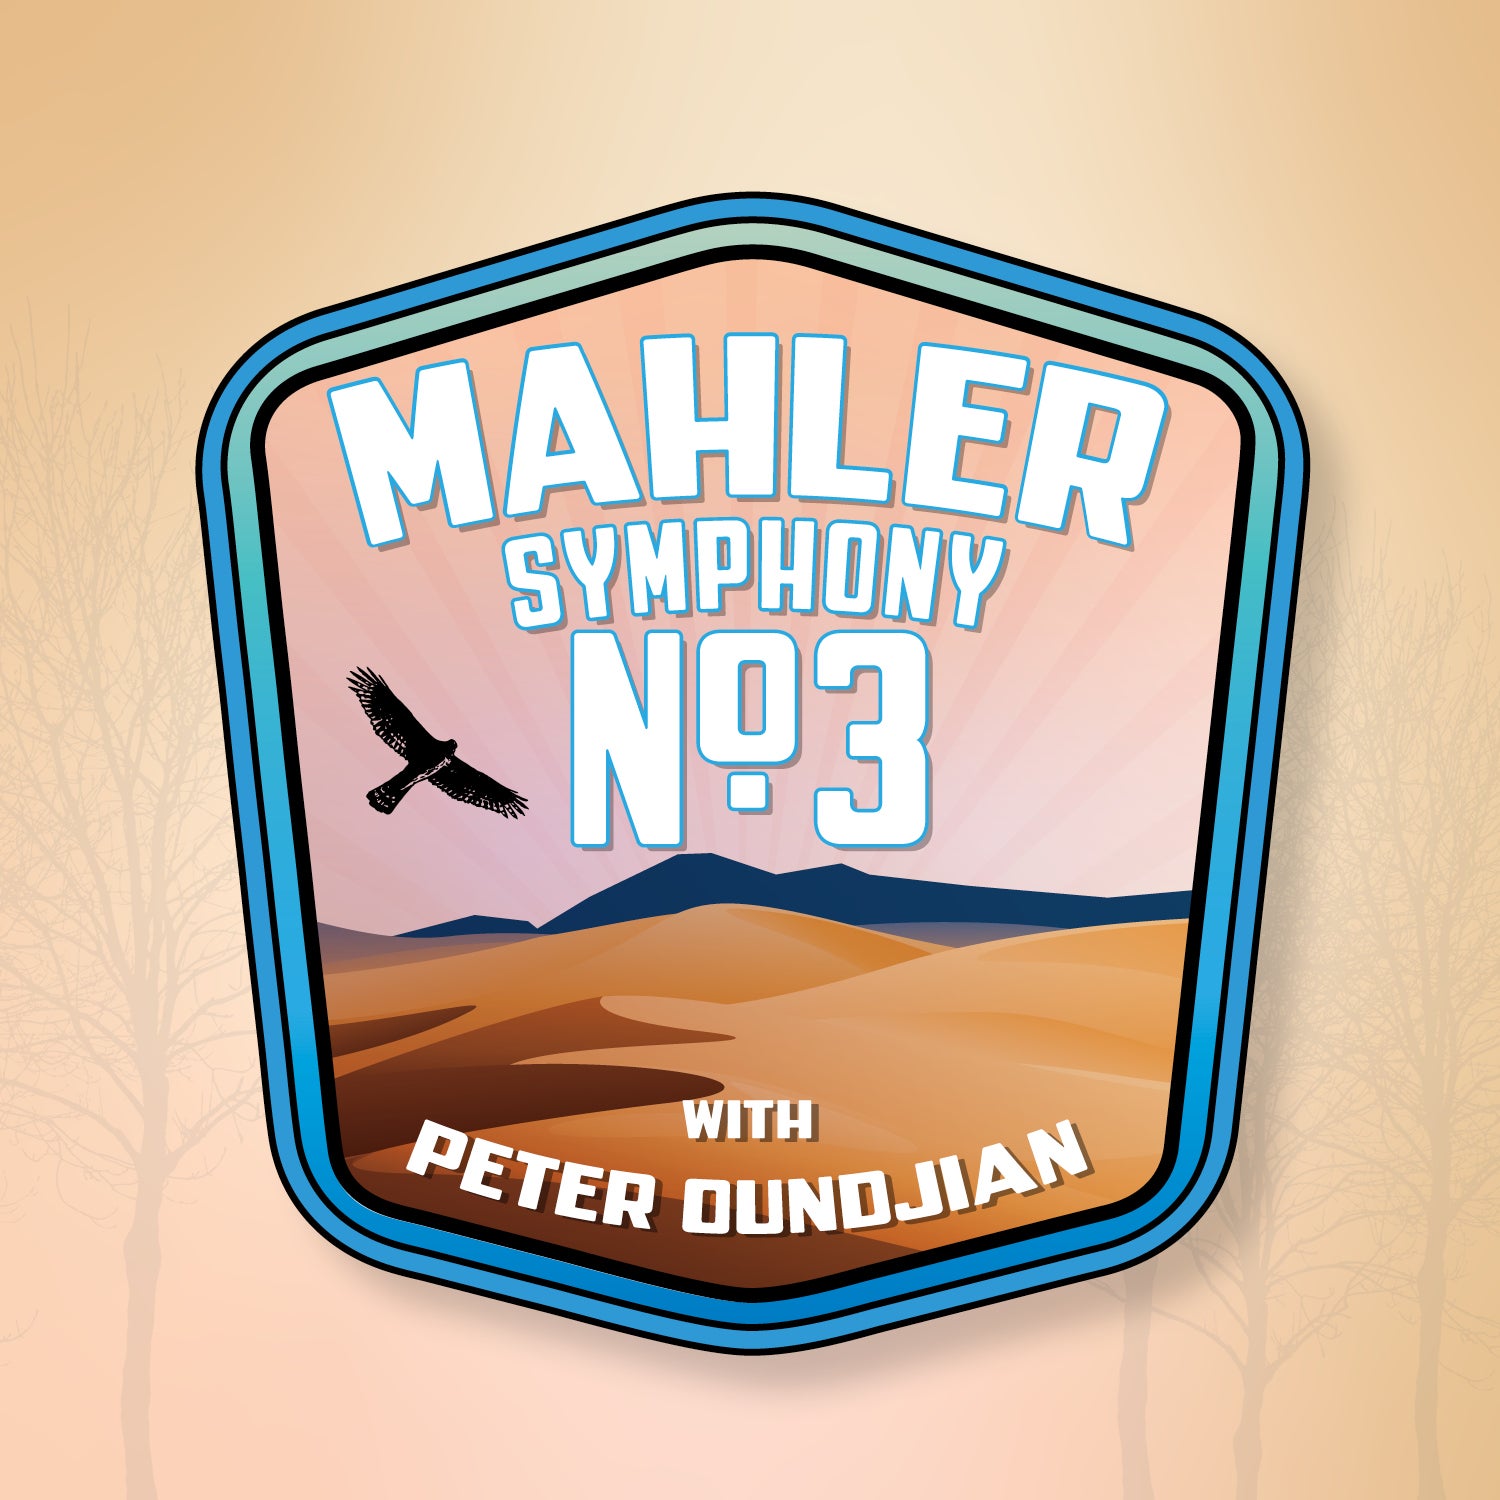 More Info for Mahler's Symphony No. 3 with Peter Oundjian